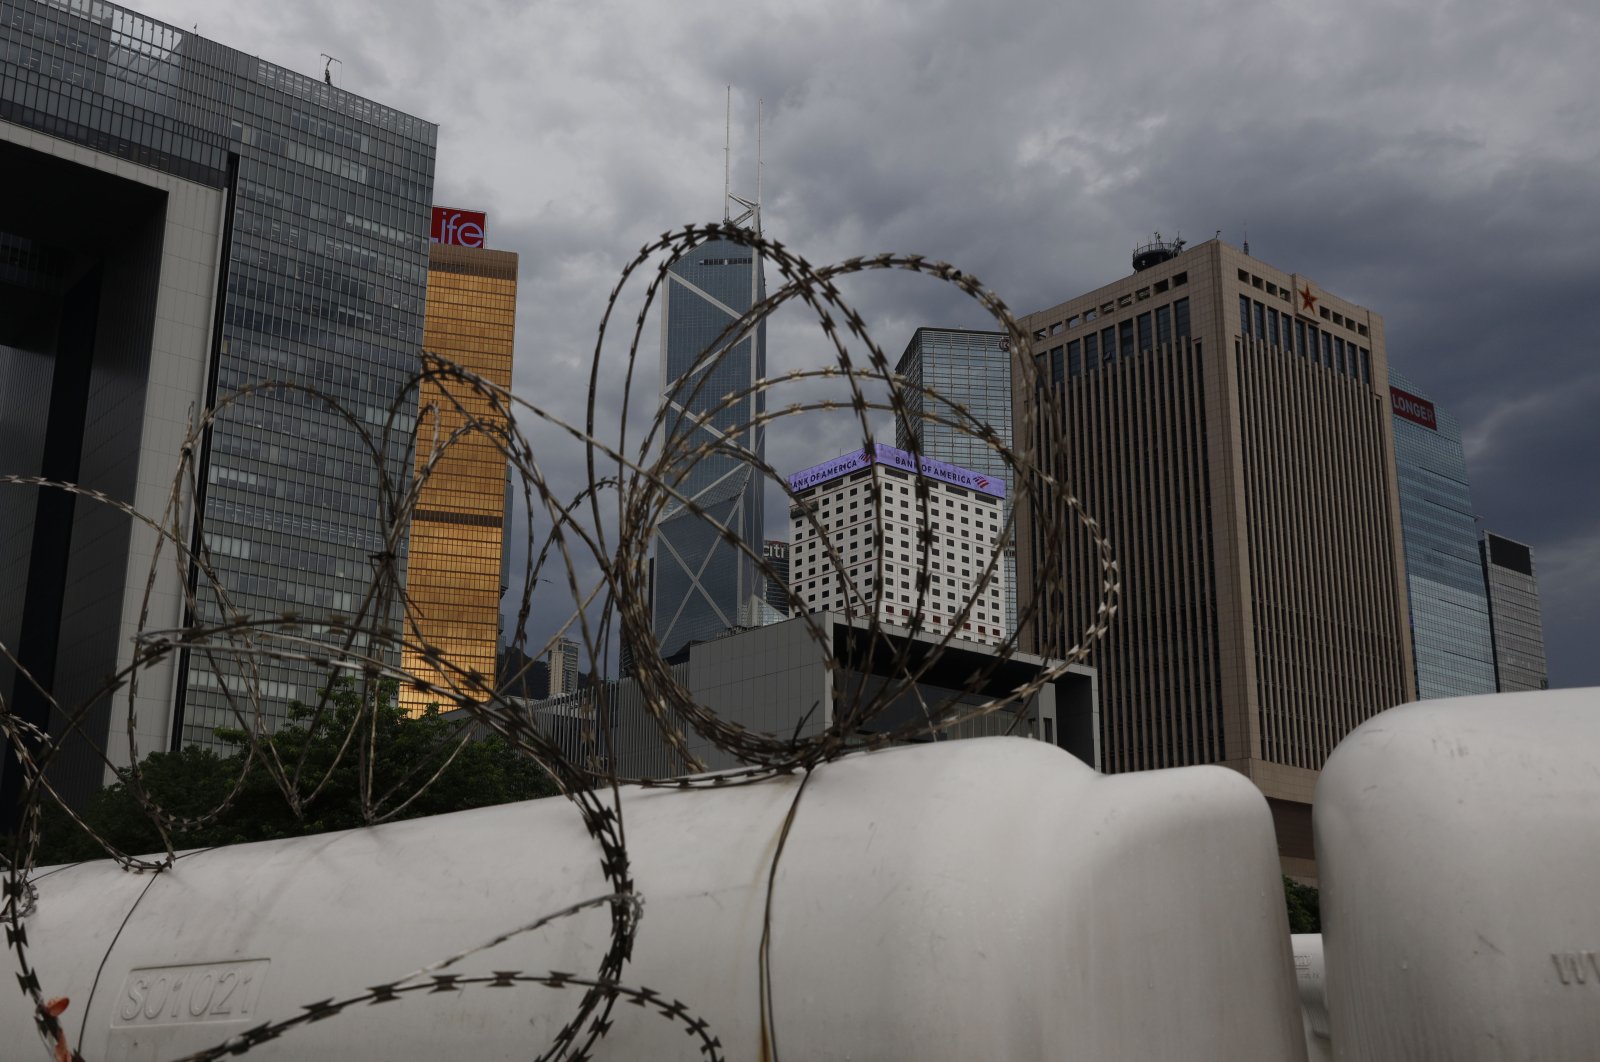 The People's Liberation Army's (PLA) central barracks building (R) is seen in the Hong Kong skyline, May 22, 2020. (AP Photo)